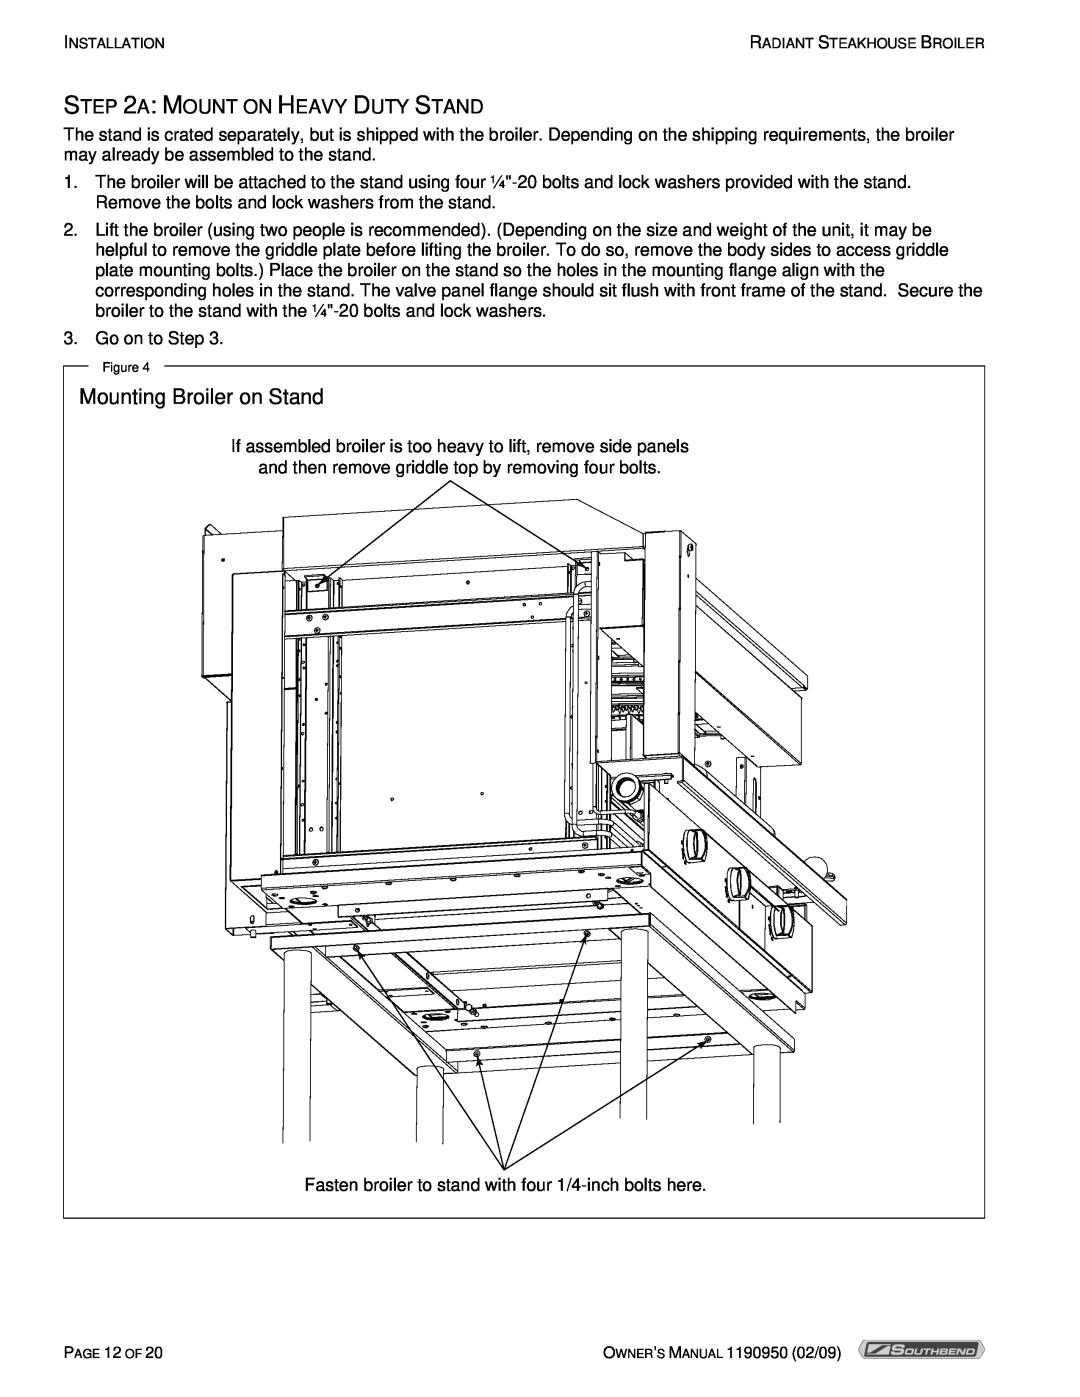 Southbend SSB-45, SSB-32, SSB-36 owner manual Mounting Broiler on Stand, A Mount On Heavy Duty Stand 